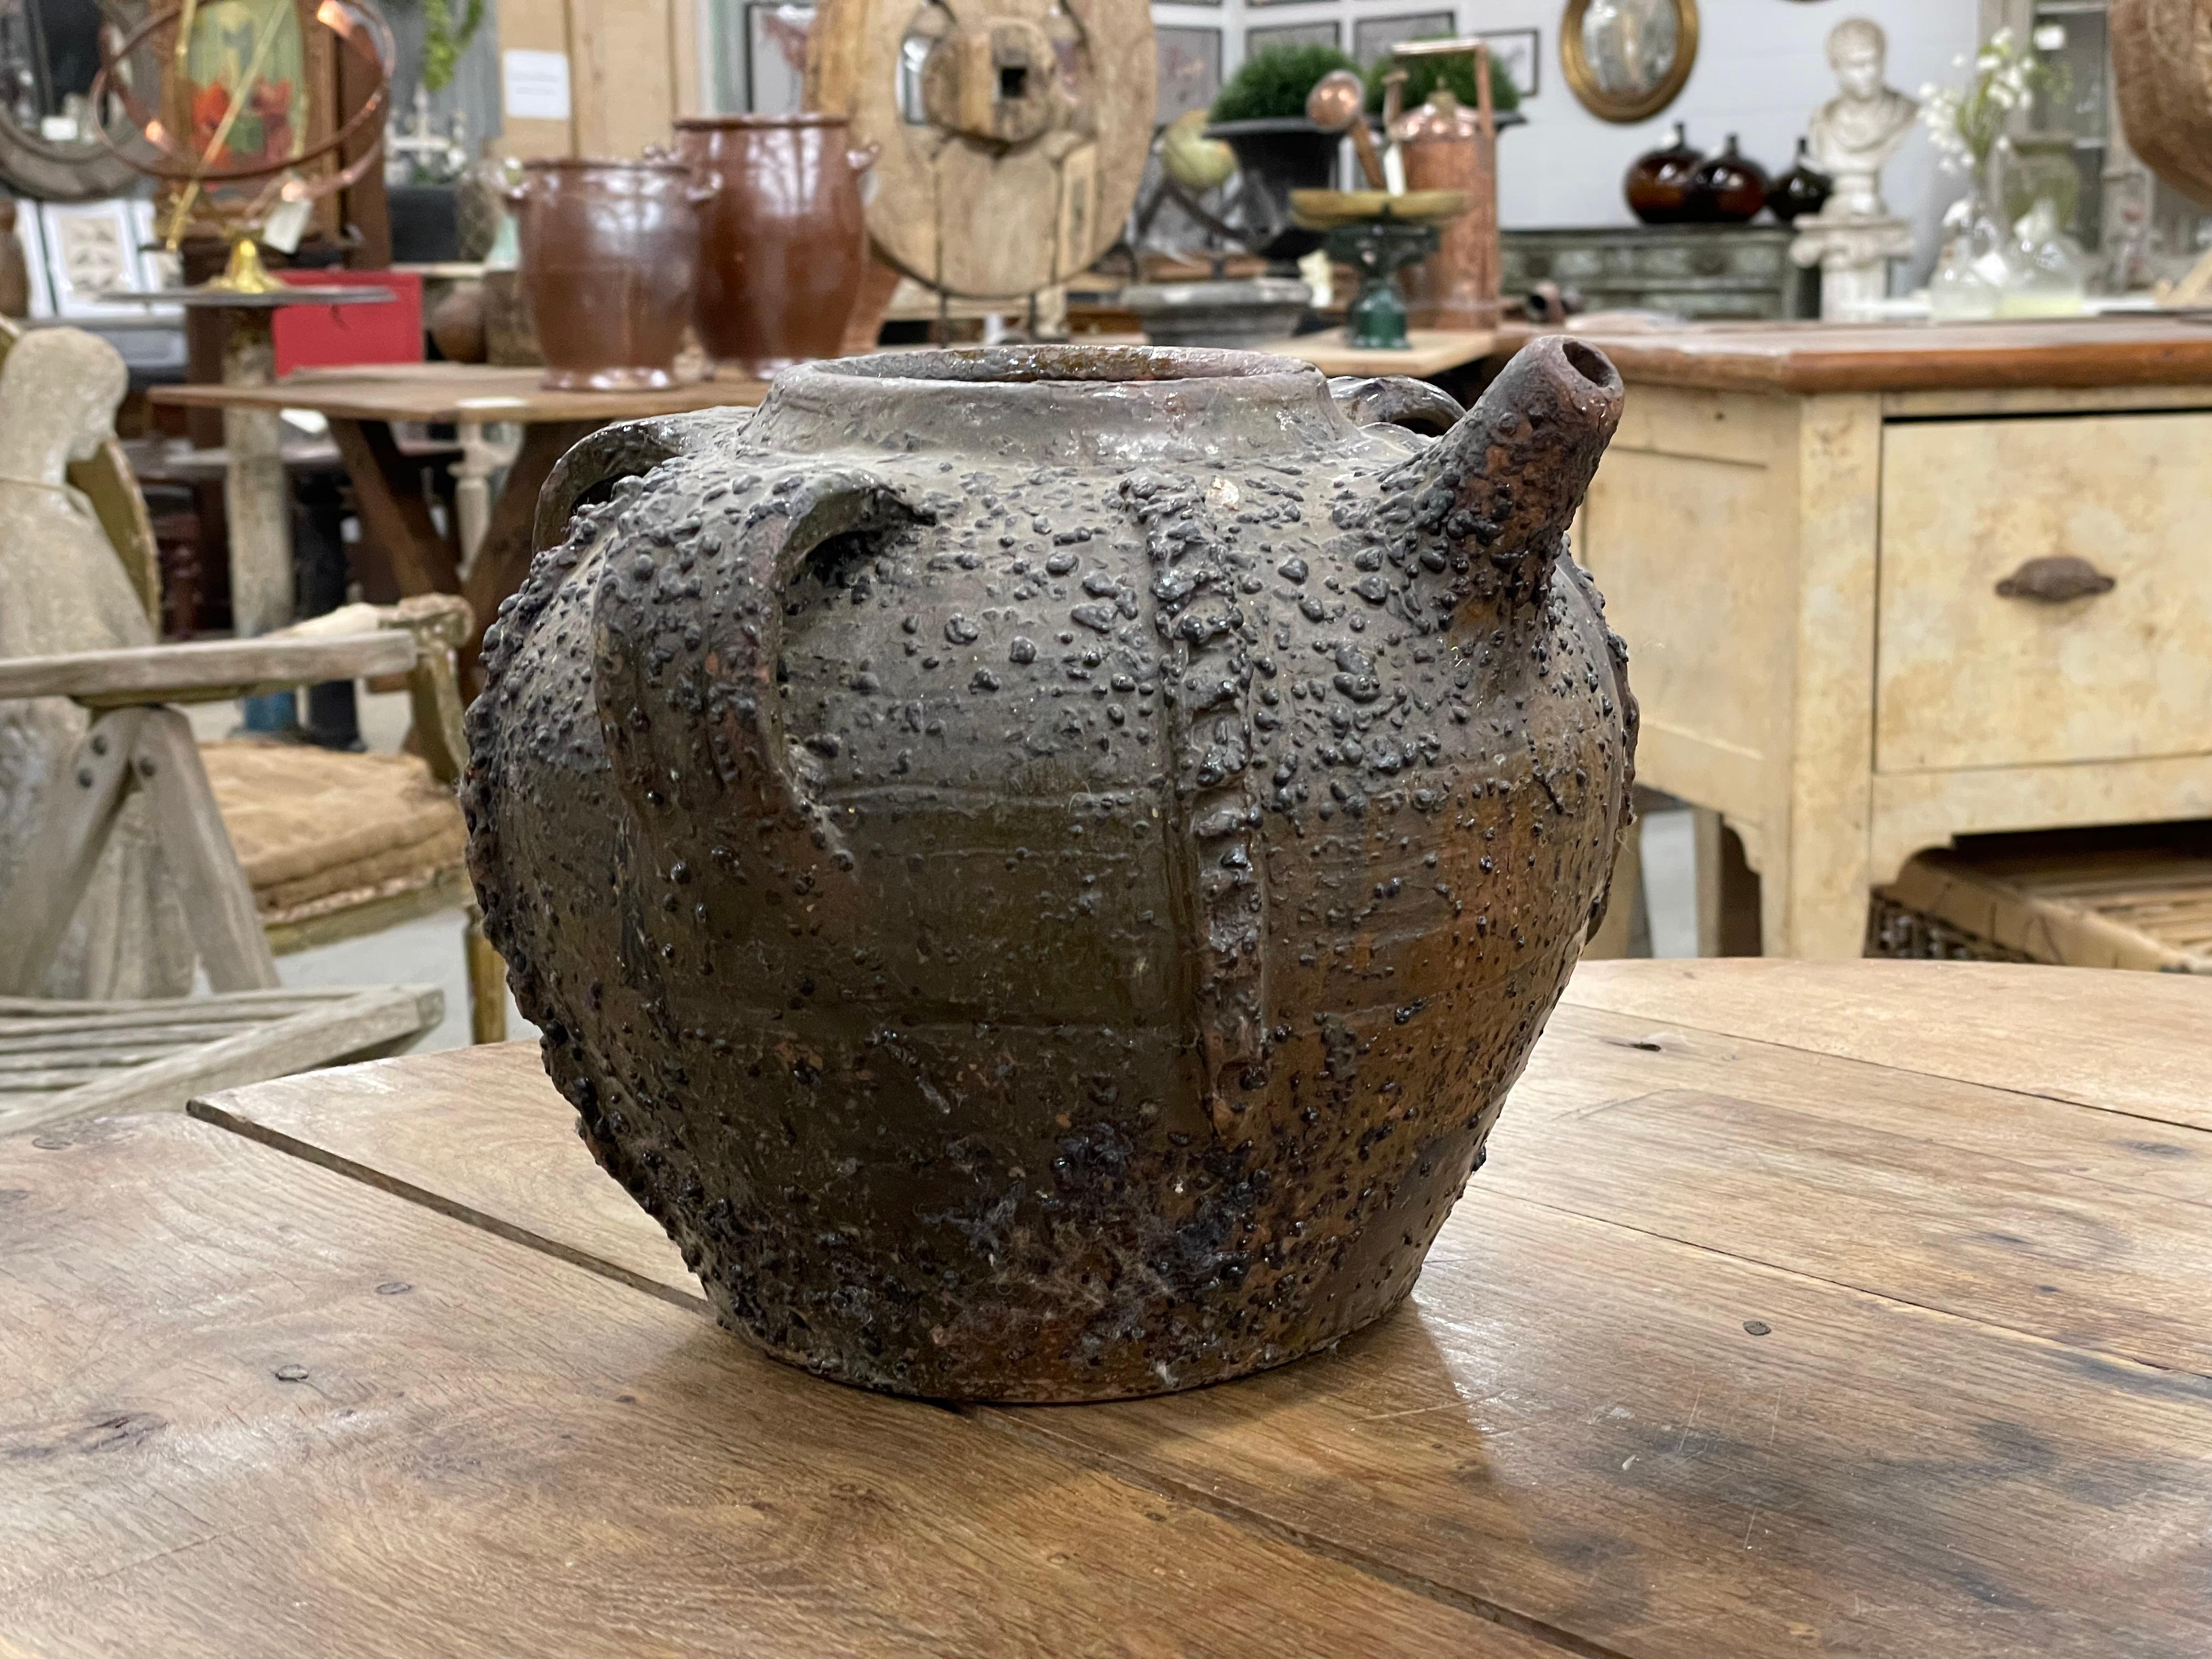 Lovely pot bellied glazed earthenware walnut oil jug with triple handles and spout is from the Périgord region in the Dordogne, France 

The jug was used to hold and transport walnut oil. Consequently, the body of the jug is covered with crystalized